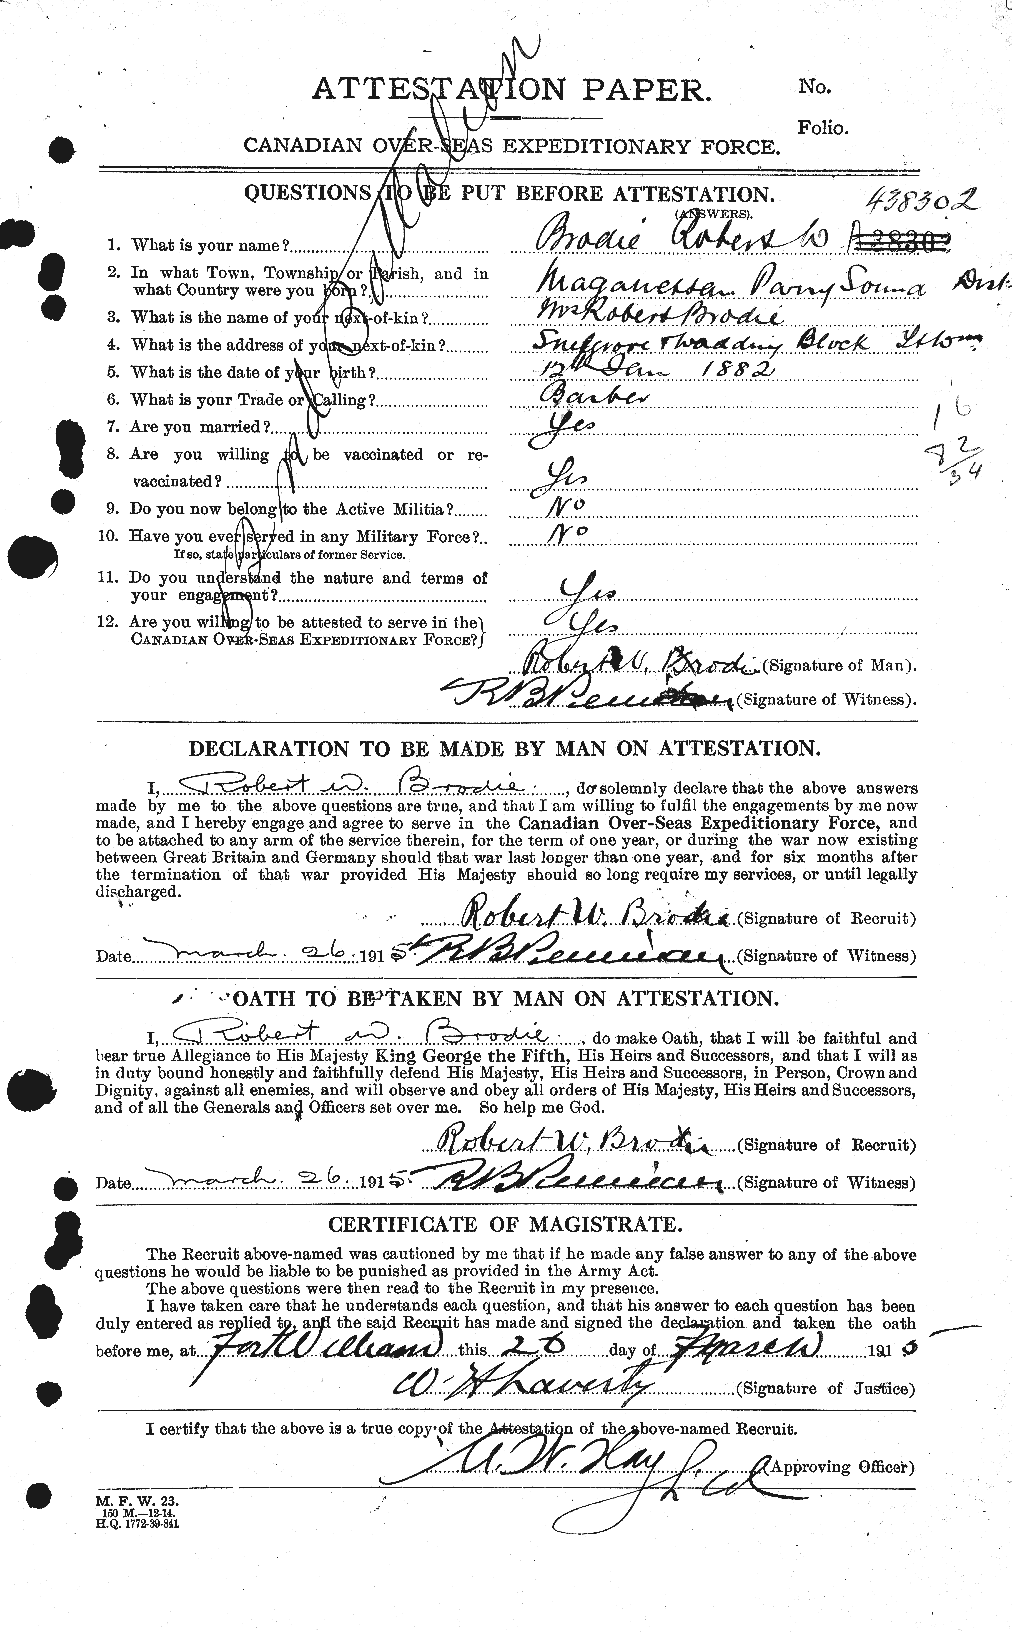 Personnel Records of the First World War - CEF 262012a